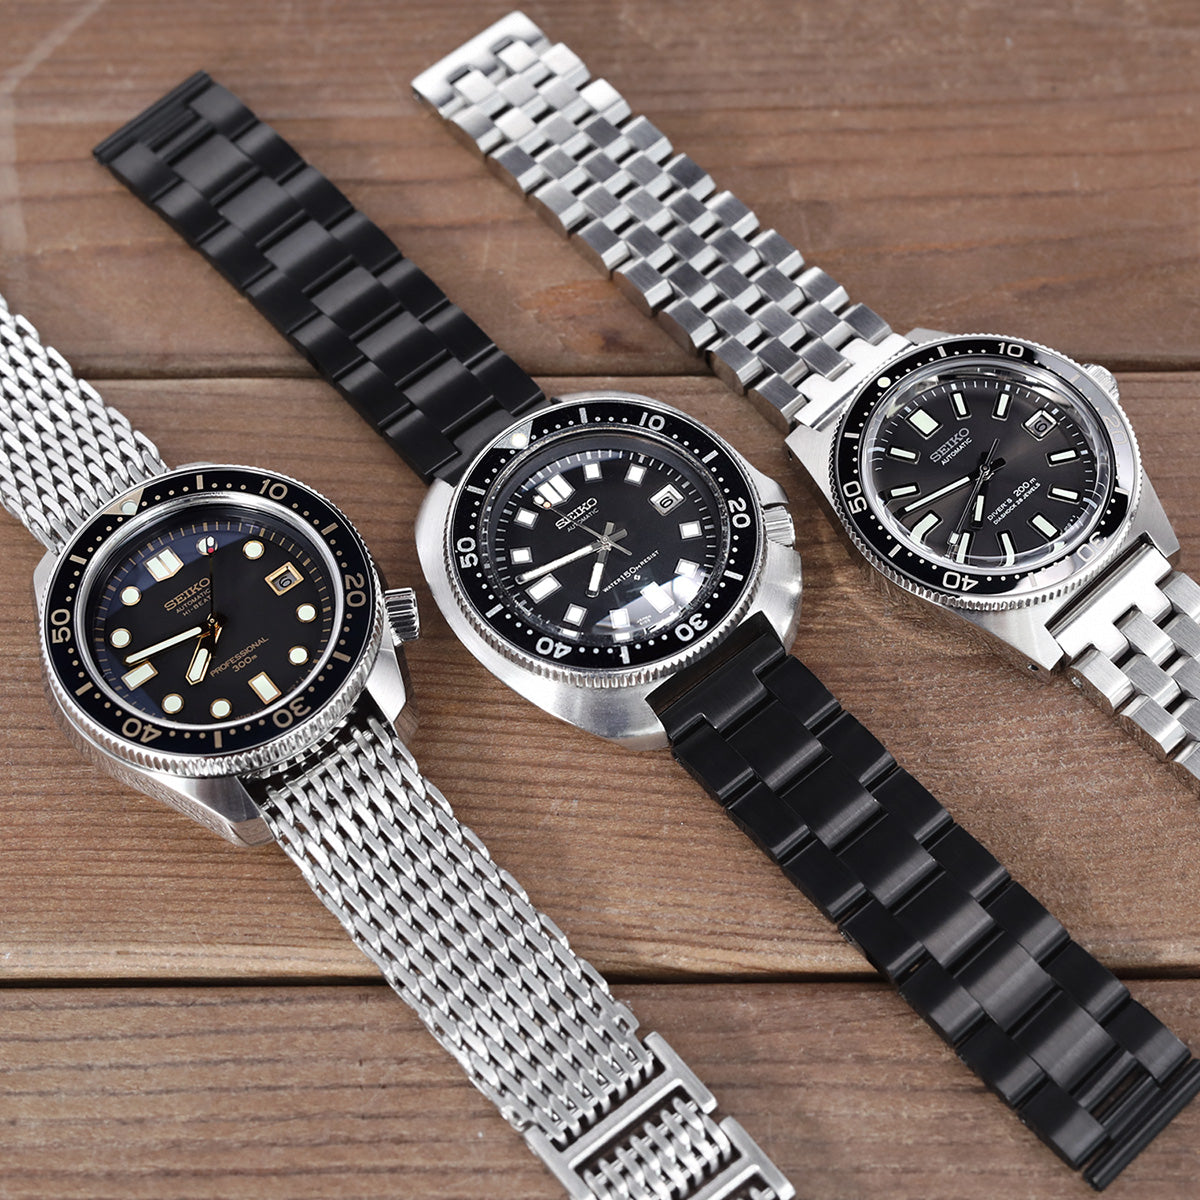 Seiko's 19mm Iconic Diver Watches | Strapcode watch straps